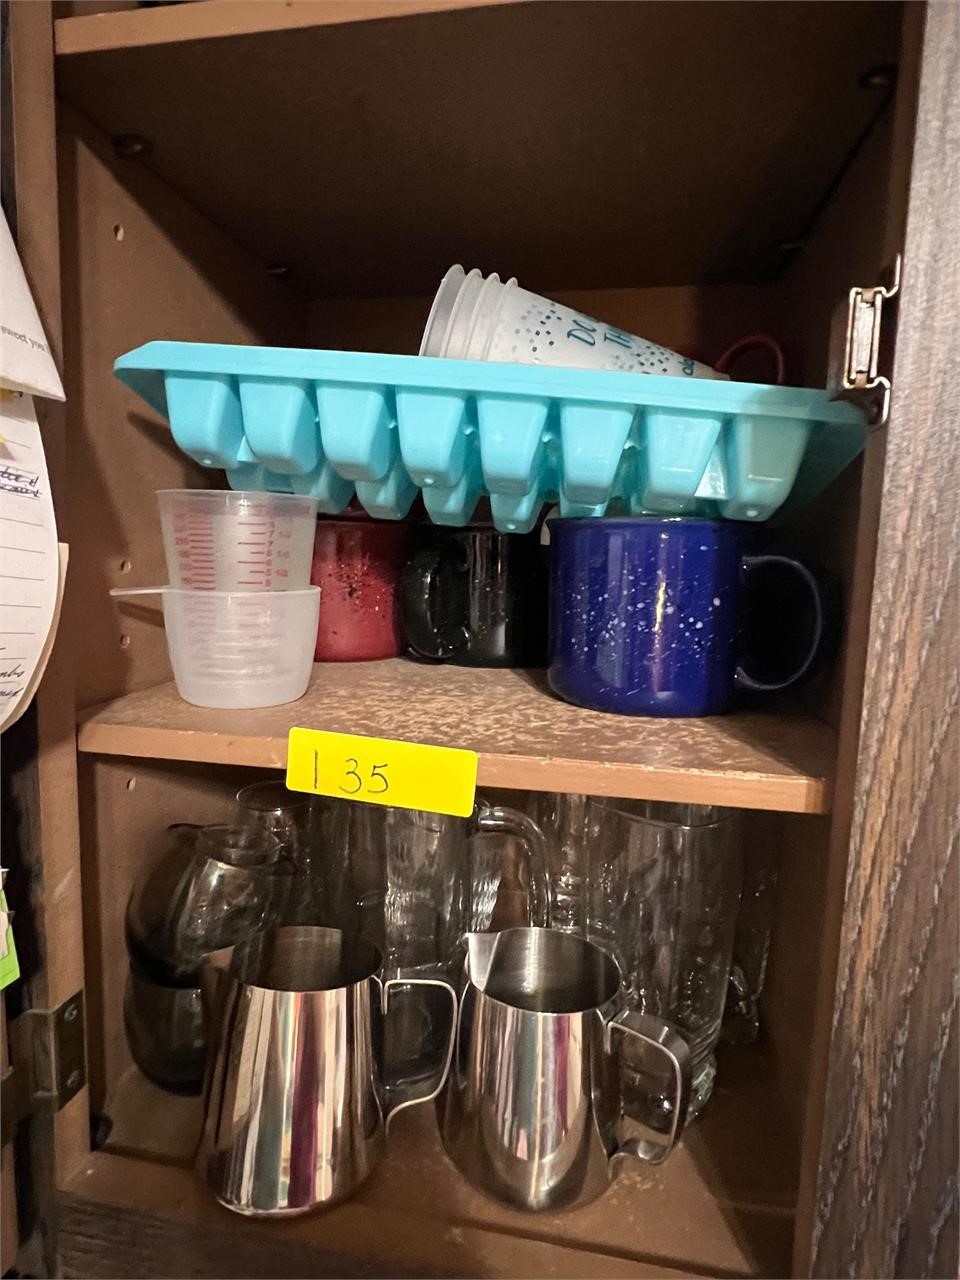 Contents in cabinet - Cups / mugs / misc.